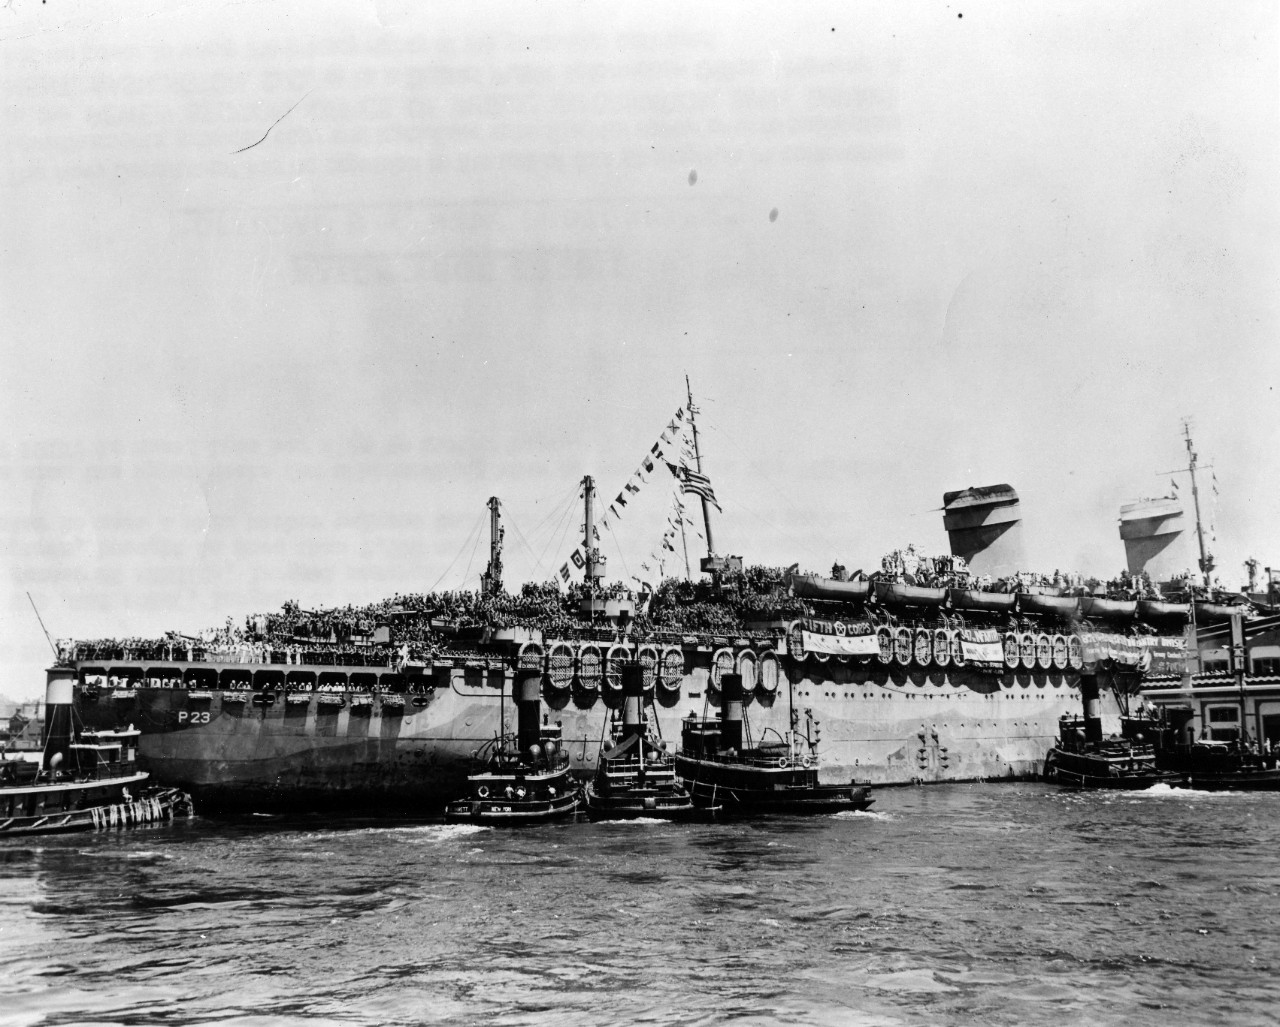 The USS West Point (AP-23), largest US Navy transport afloat, arrives in New York. The former SS America, largest merchant ship ever constructed in American shipyards, brought in more than 7,500 veteran soldiers from the European theater to meet a warm harbor welcome today in America's greatest port. GI's cram the upper decks for a homecoming view of New York as the 723-foot West Point is nosed into her slip by harbor tugs. July 11, 1945. 